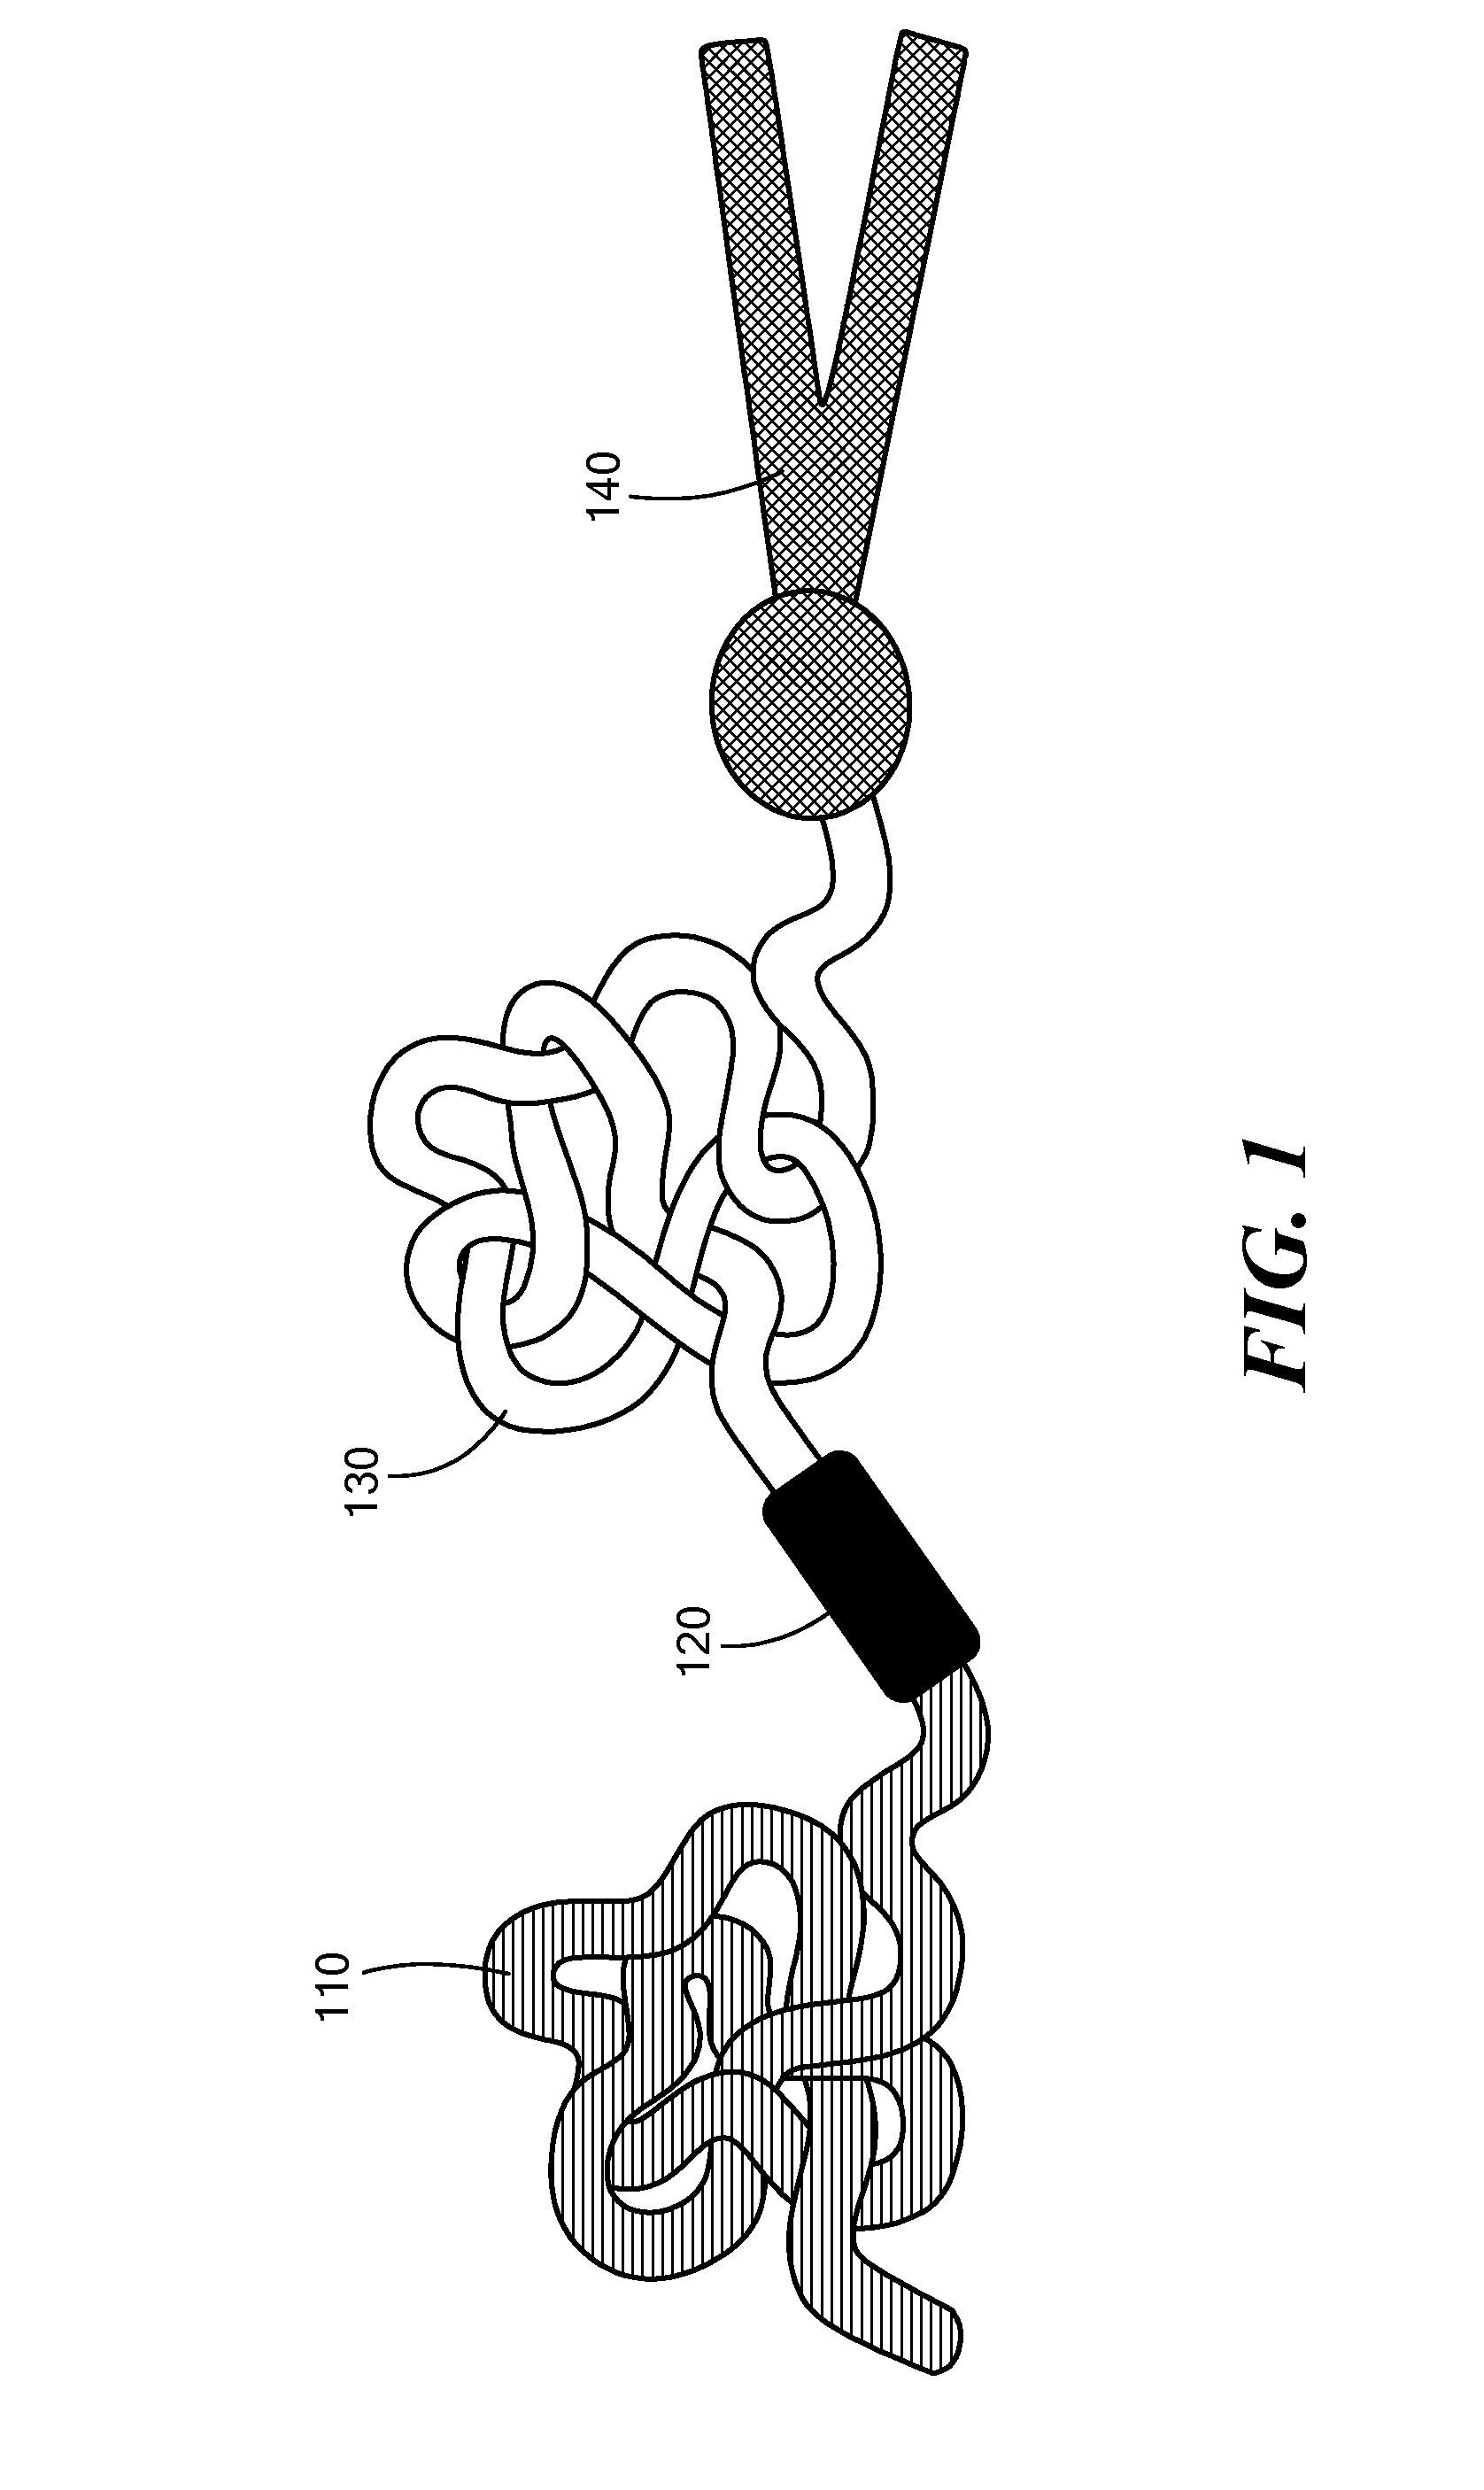 Hypoxia-Targeted Delivery System for Pharmaceutical Agents